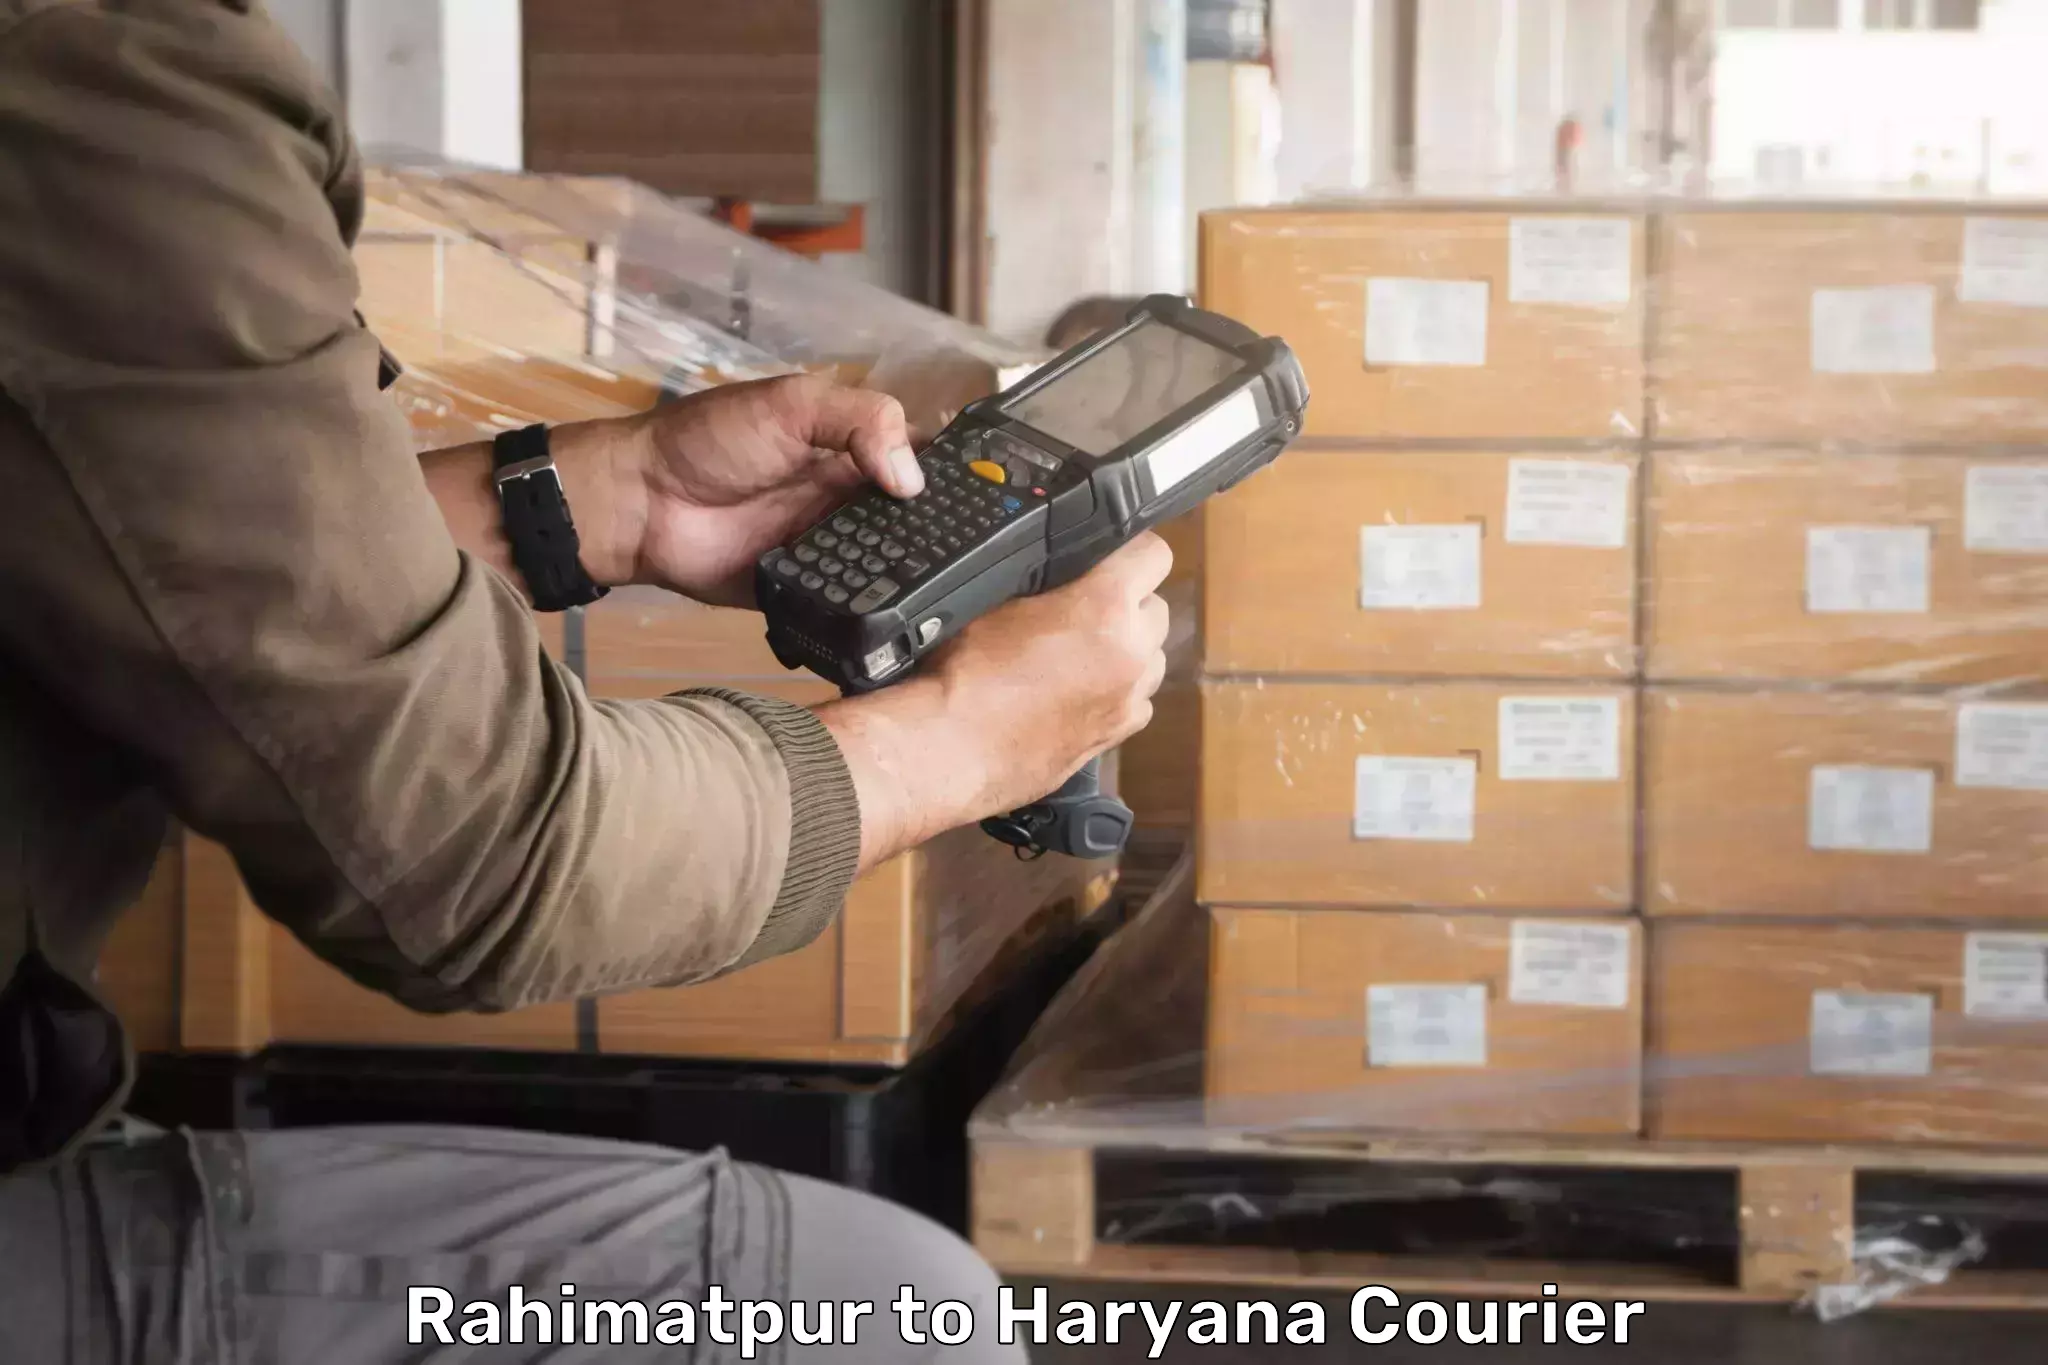 24-hour courier service Rahimatpur to Hansi